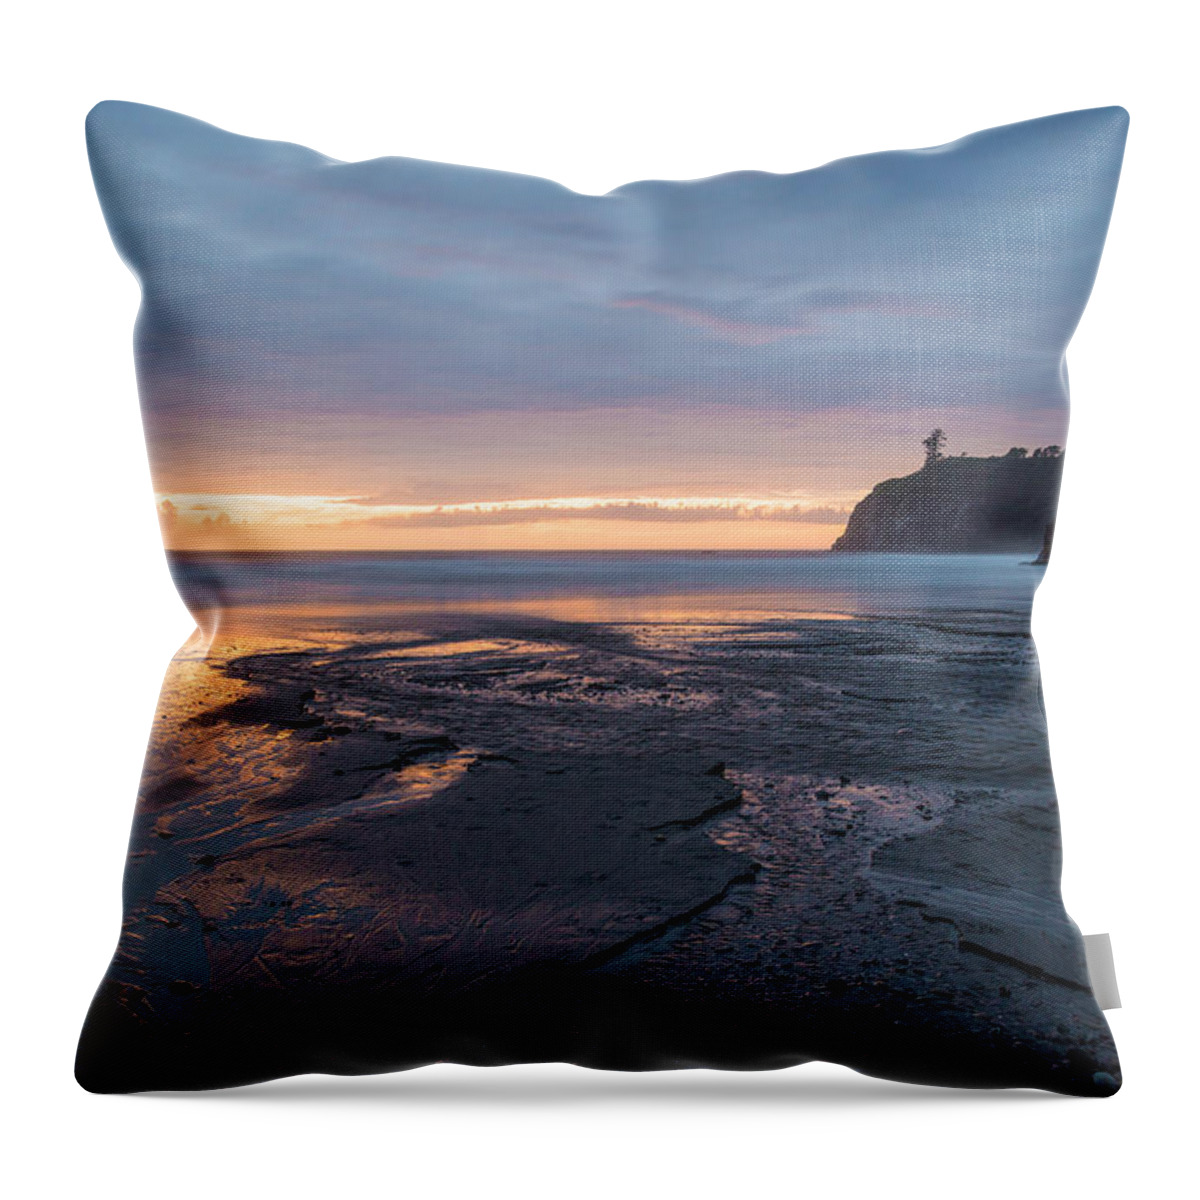 Olympic National Park Throw Pillow featuring the photograph Holy Endings by Kristopher Schoenleber